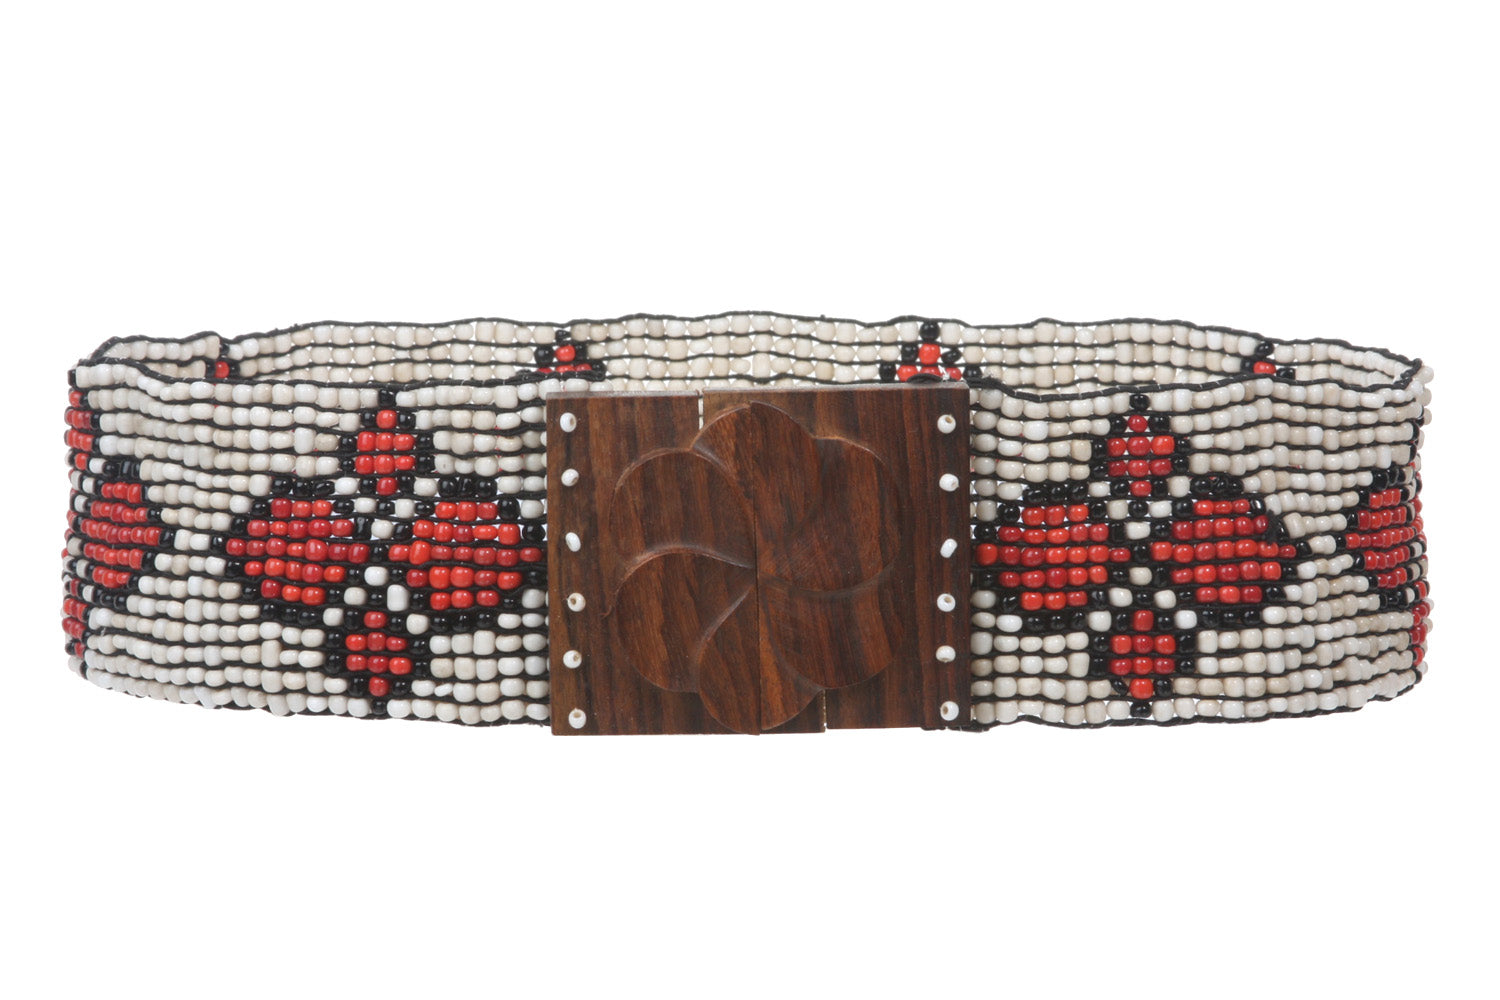 2 1/4" Beaded Stretch Belt With Wood Buckle Closure